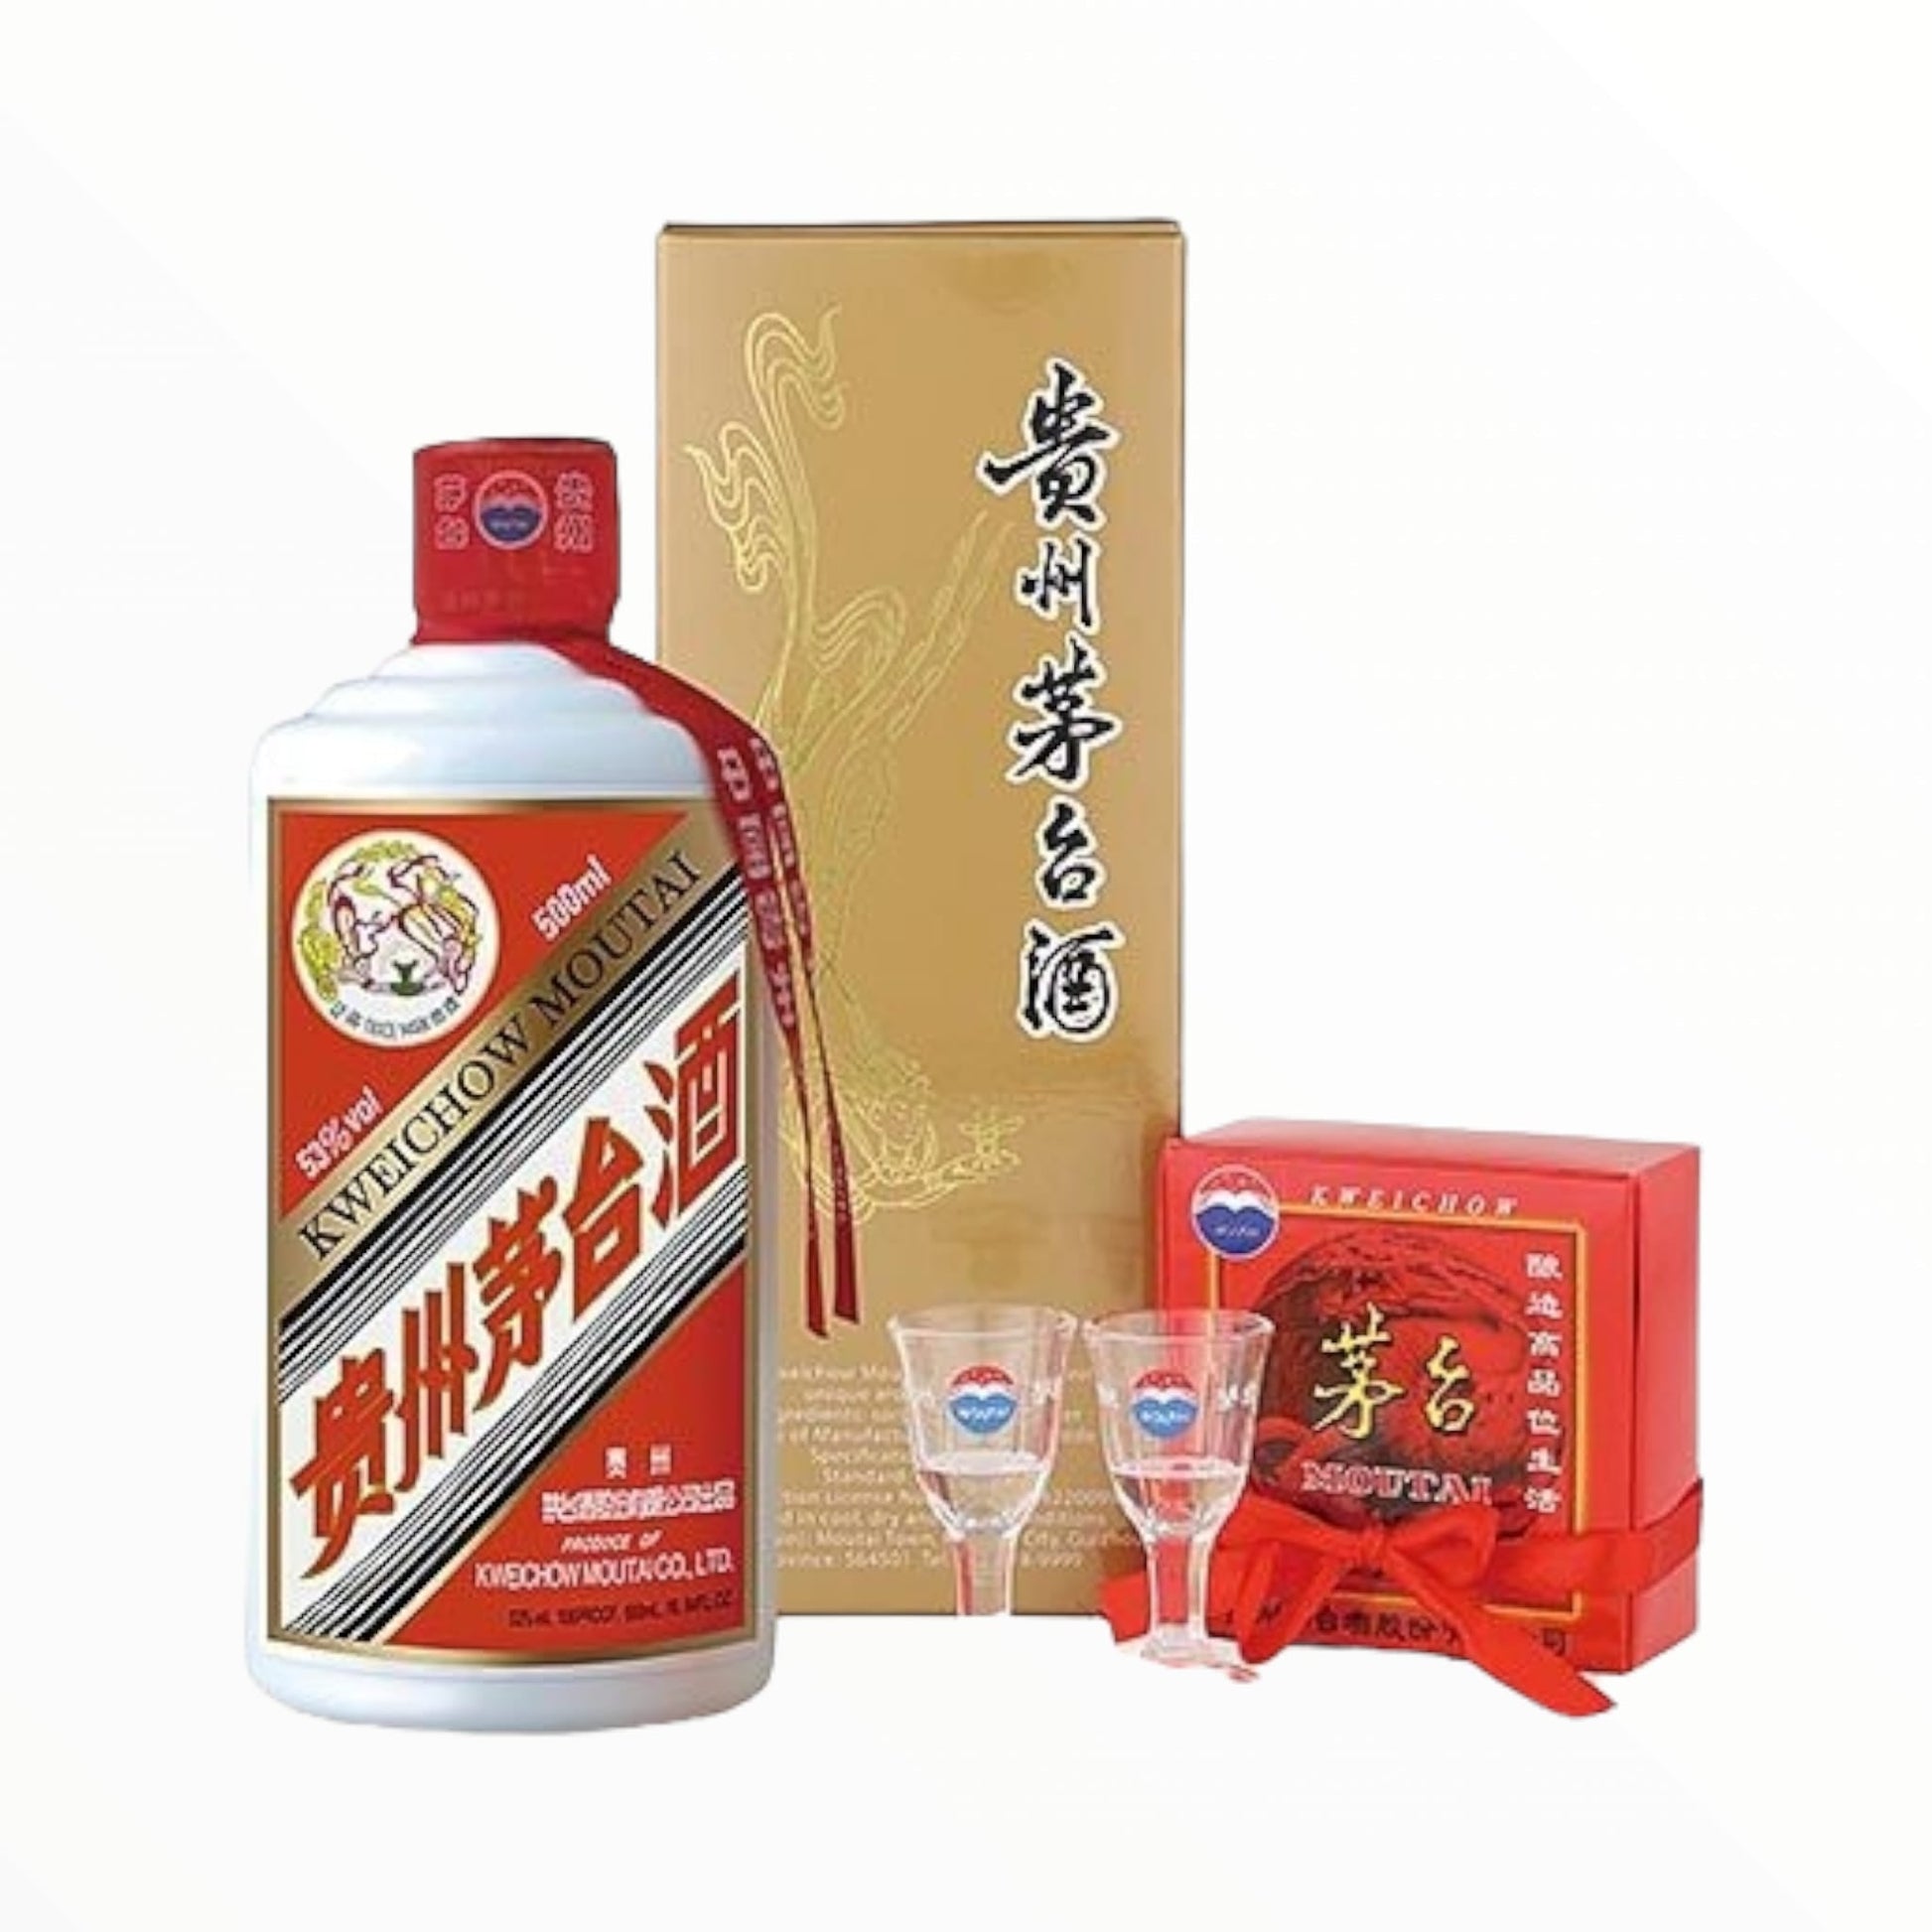 Moutai is made of sorghum, wheat, water combined with an extraordinary technology, one year production cycle through a high temperature fermentation, high temperature distilled and 5 years ageing which refined out the national spirit of China.